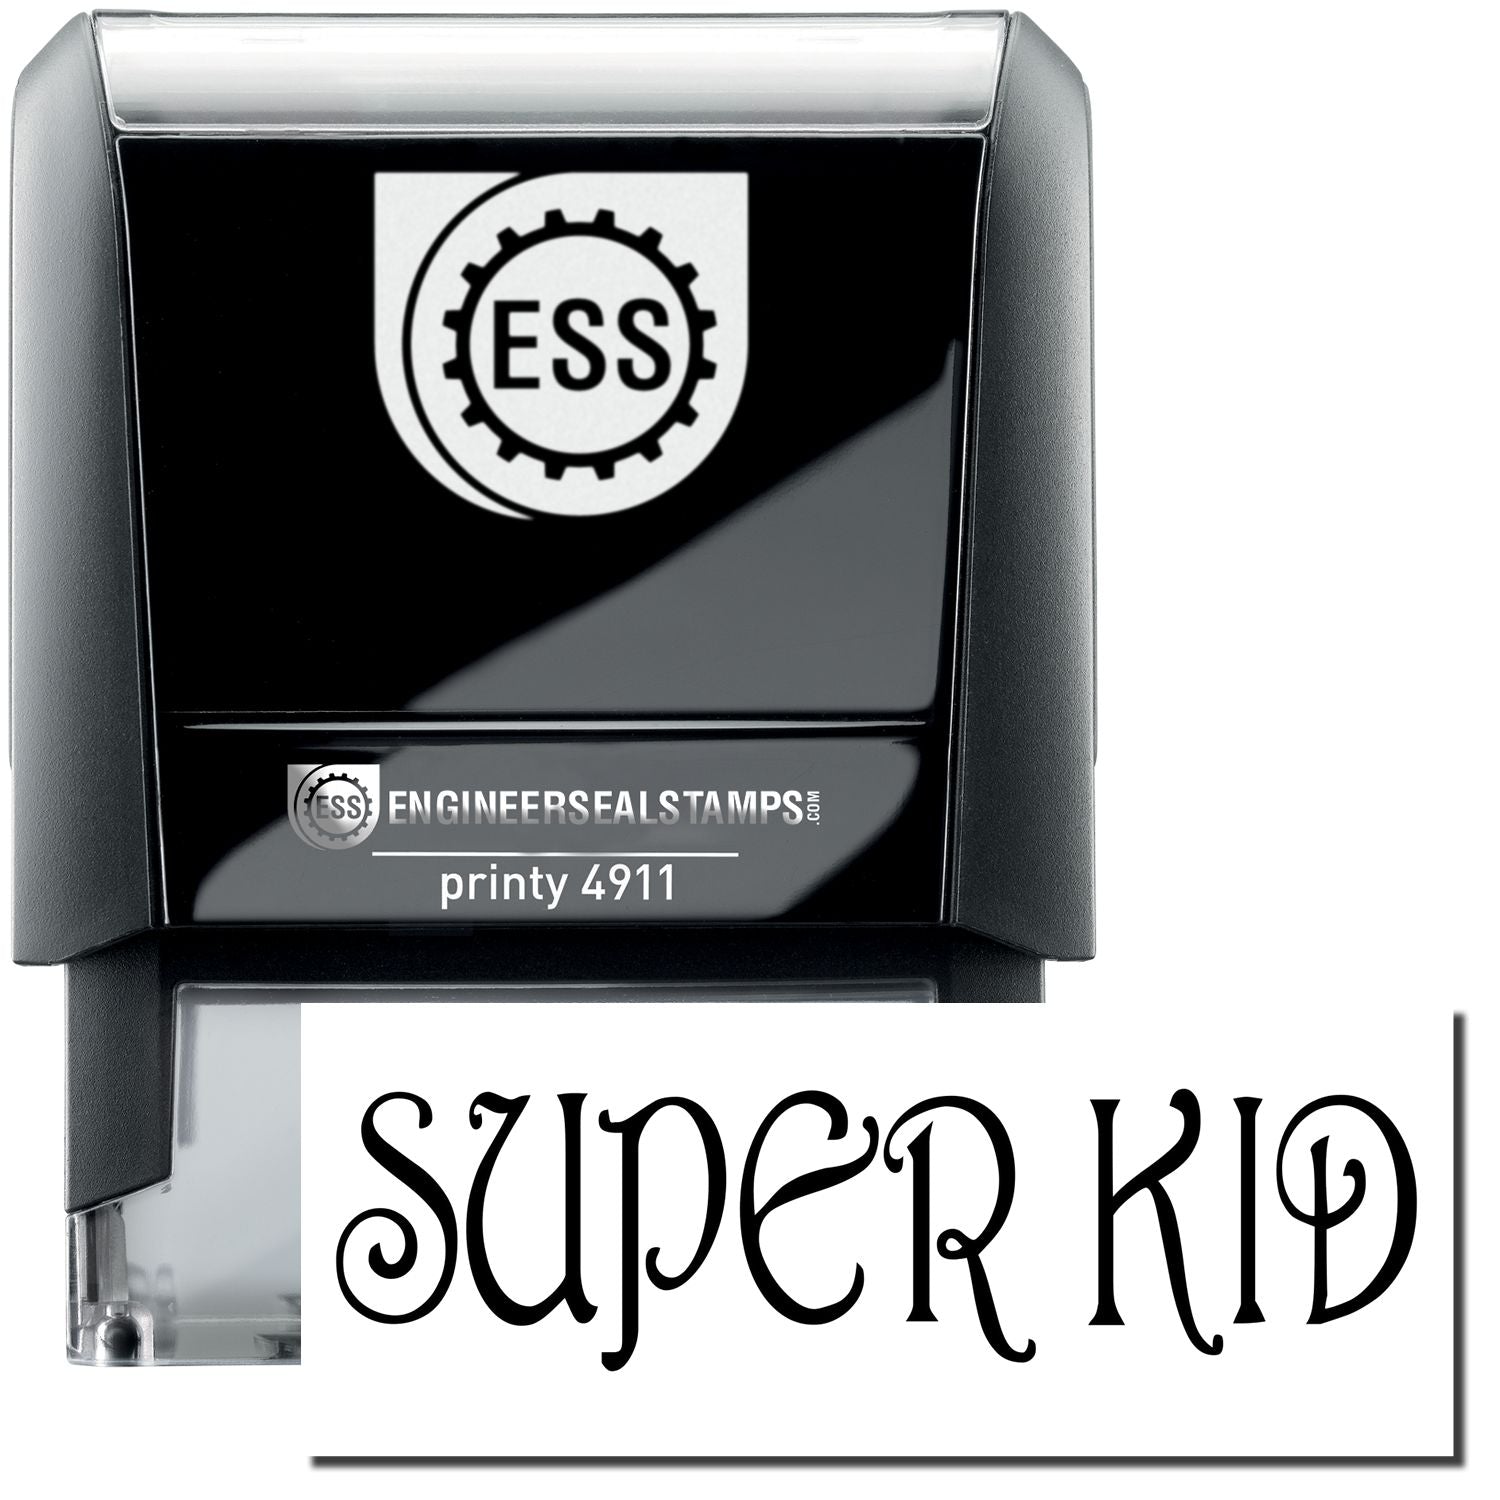 A self-inking stamp with a stamped image showing how the text "SUPER KID" is displayed after stamping.